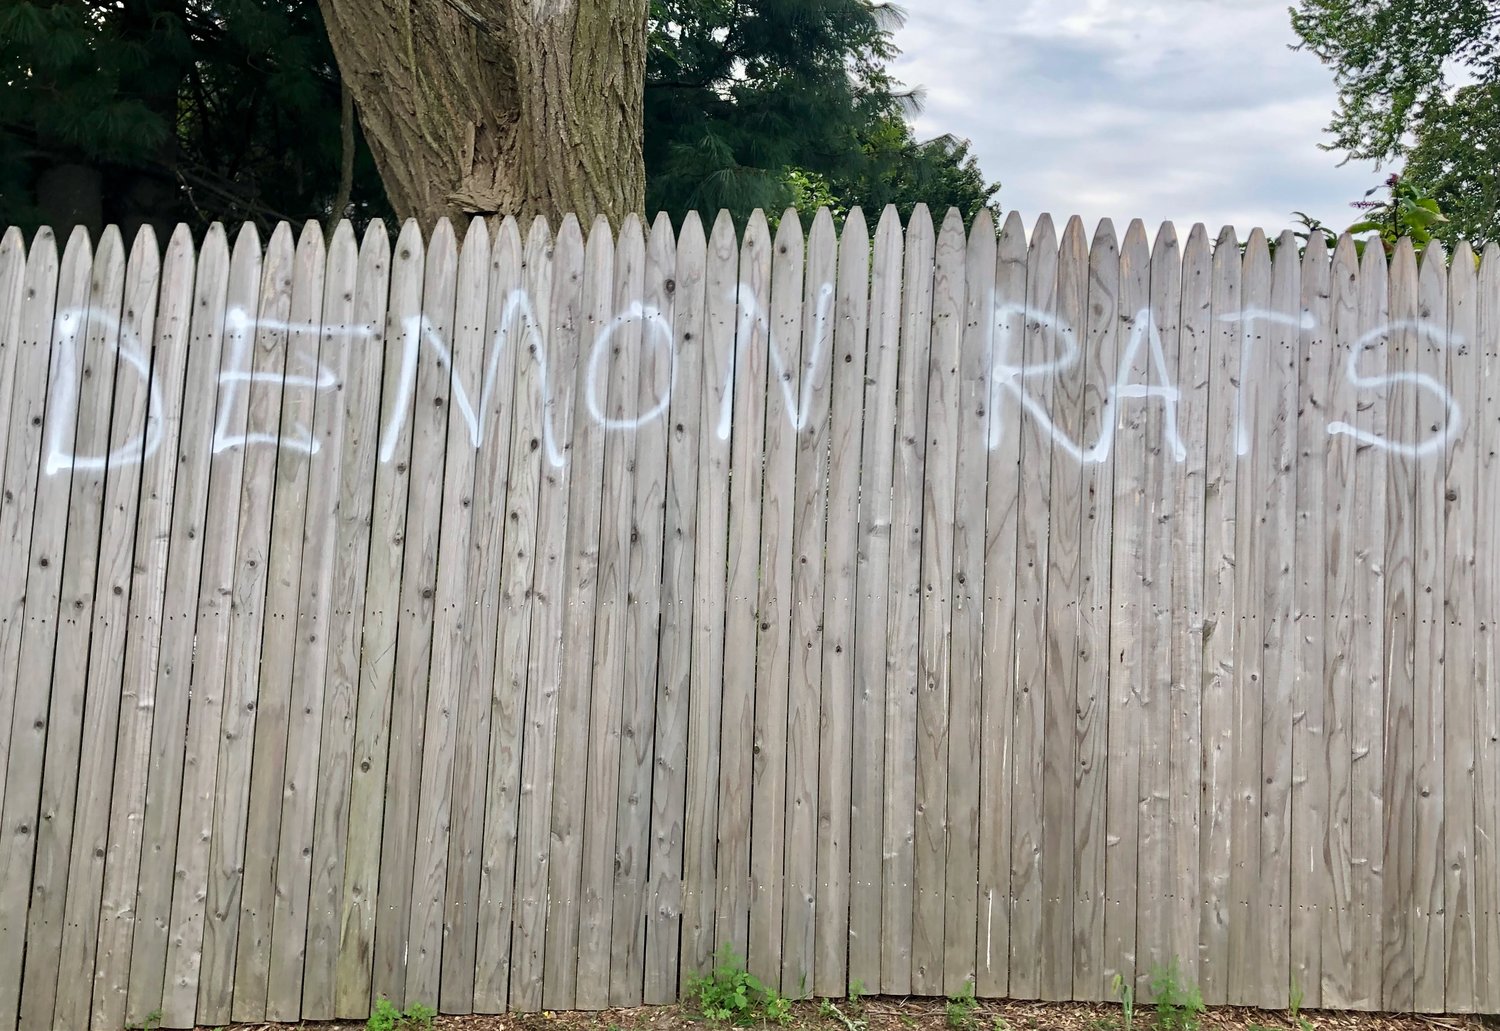 An example of the graffiti that appeared on a fence outside the CFP Arts, Wellness, and Community Center on Sunday, just hours before the Portsmouth Democratic Town Committee’s annual fund-raiser there.